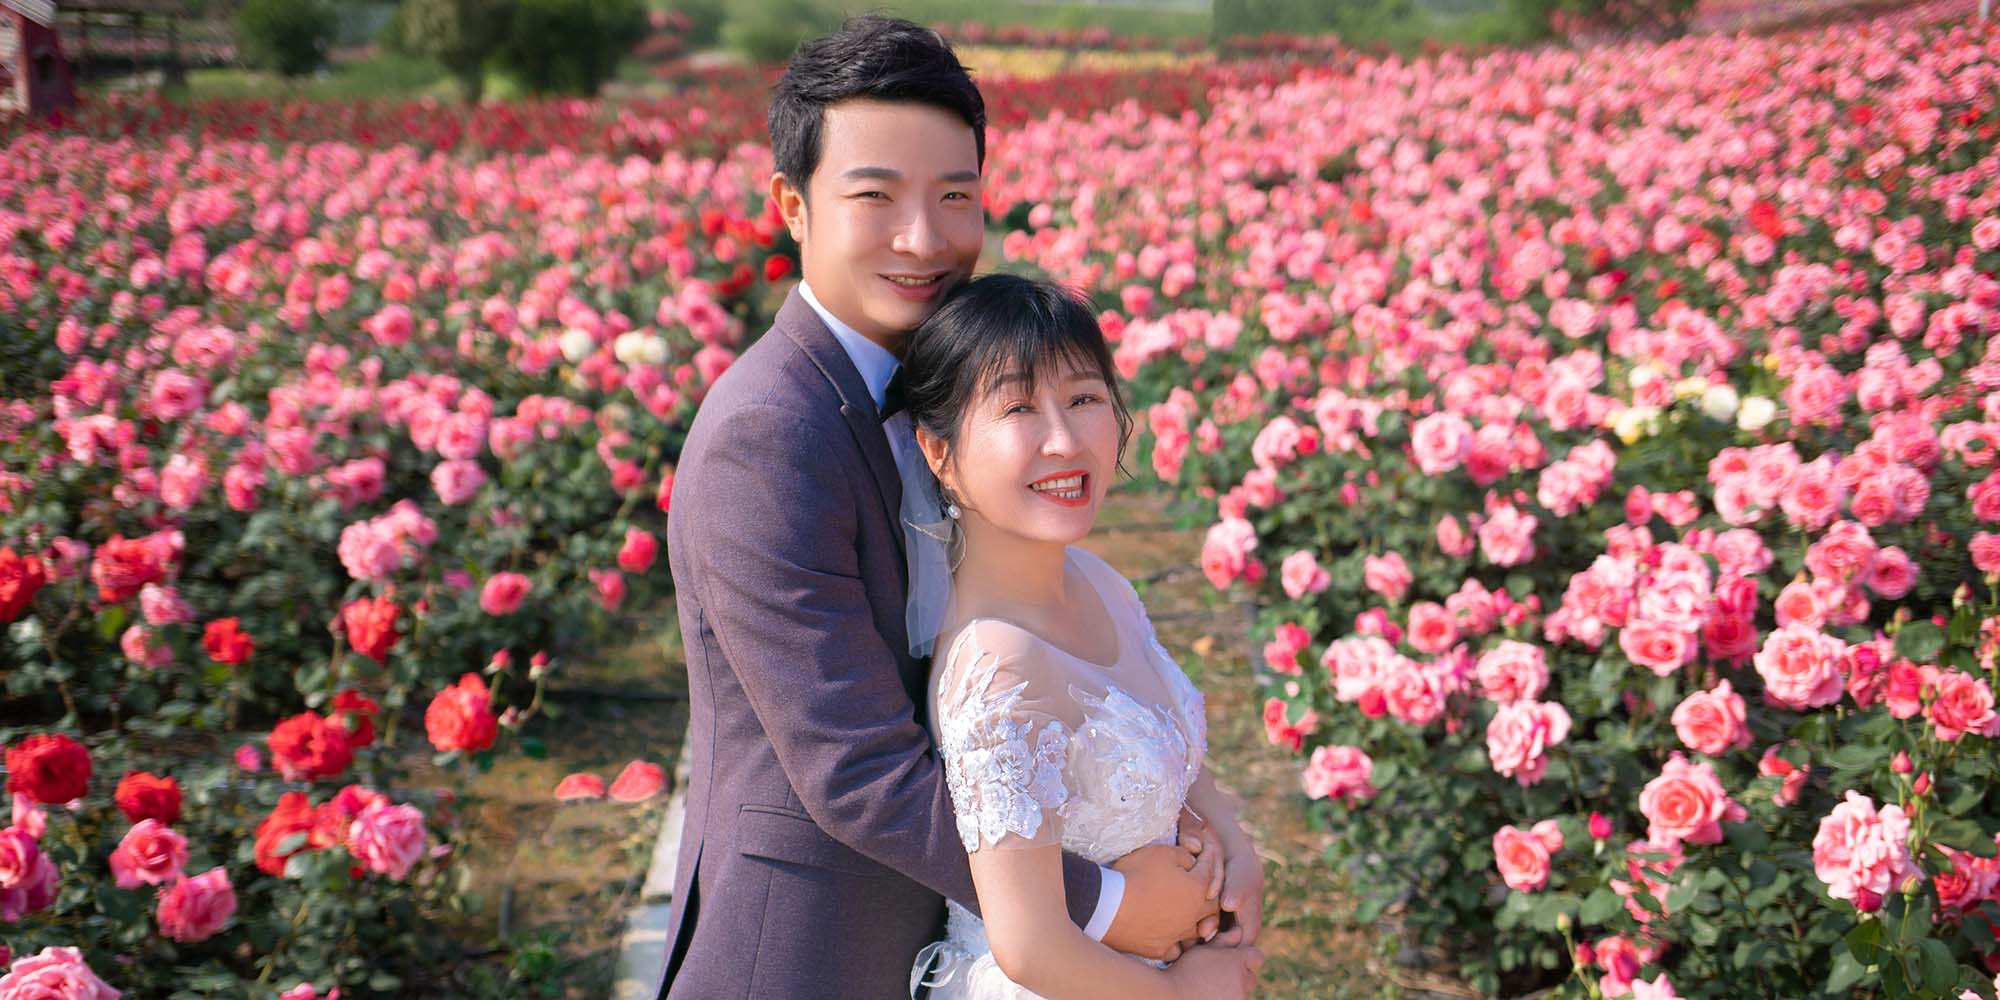 A Disabled Chinese Poet’s Wedding Plan Invites Cheers and Jeers